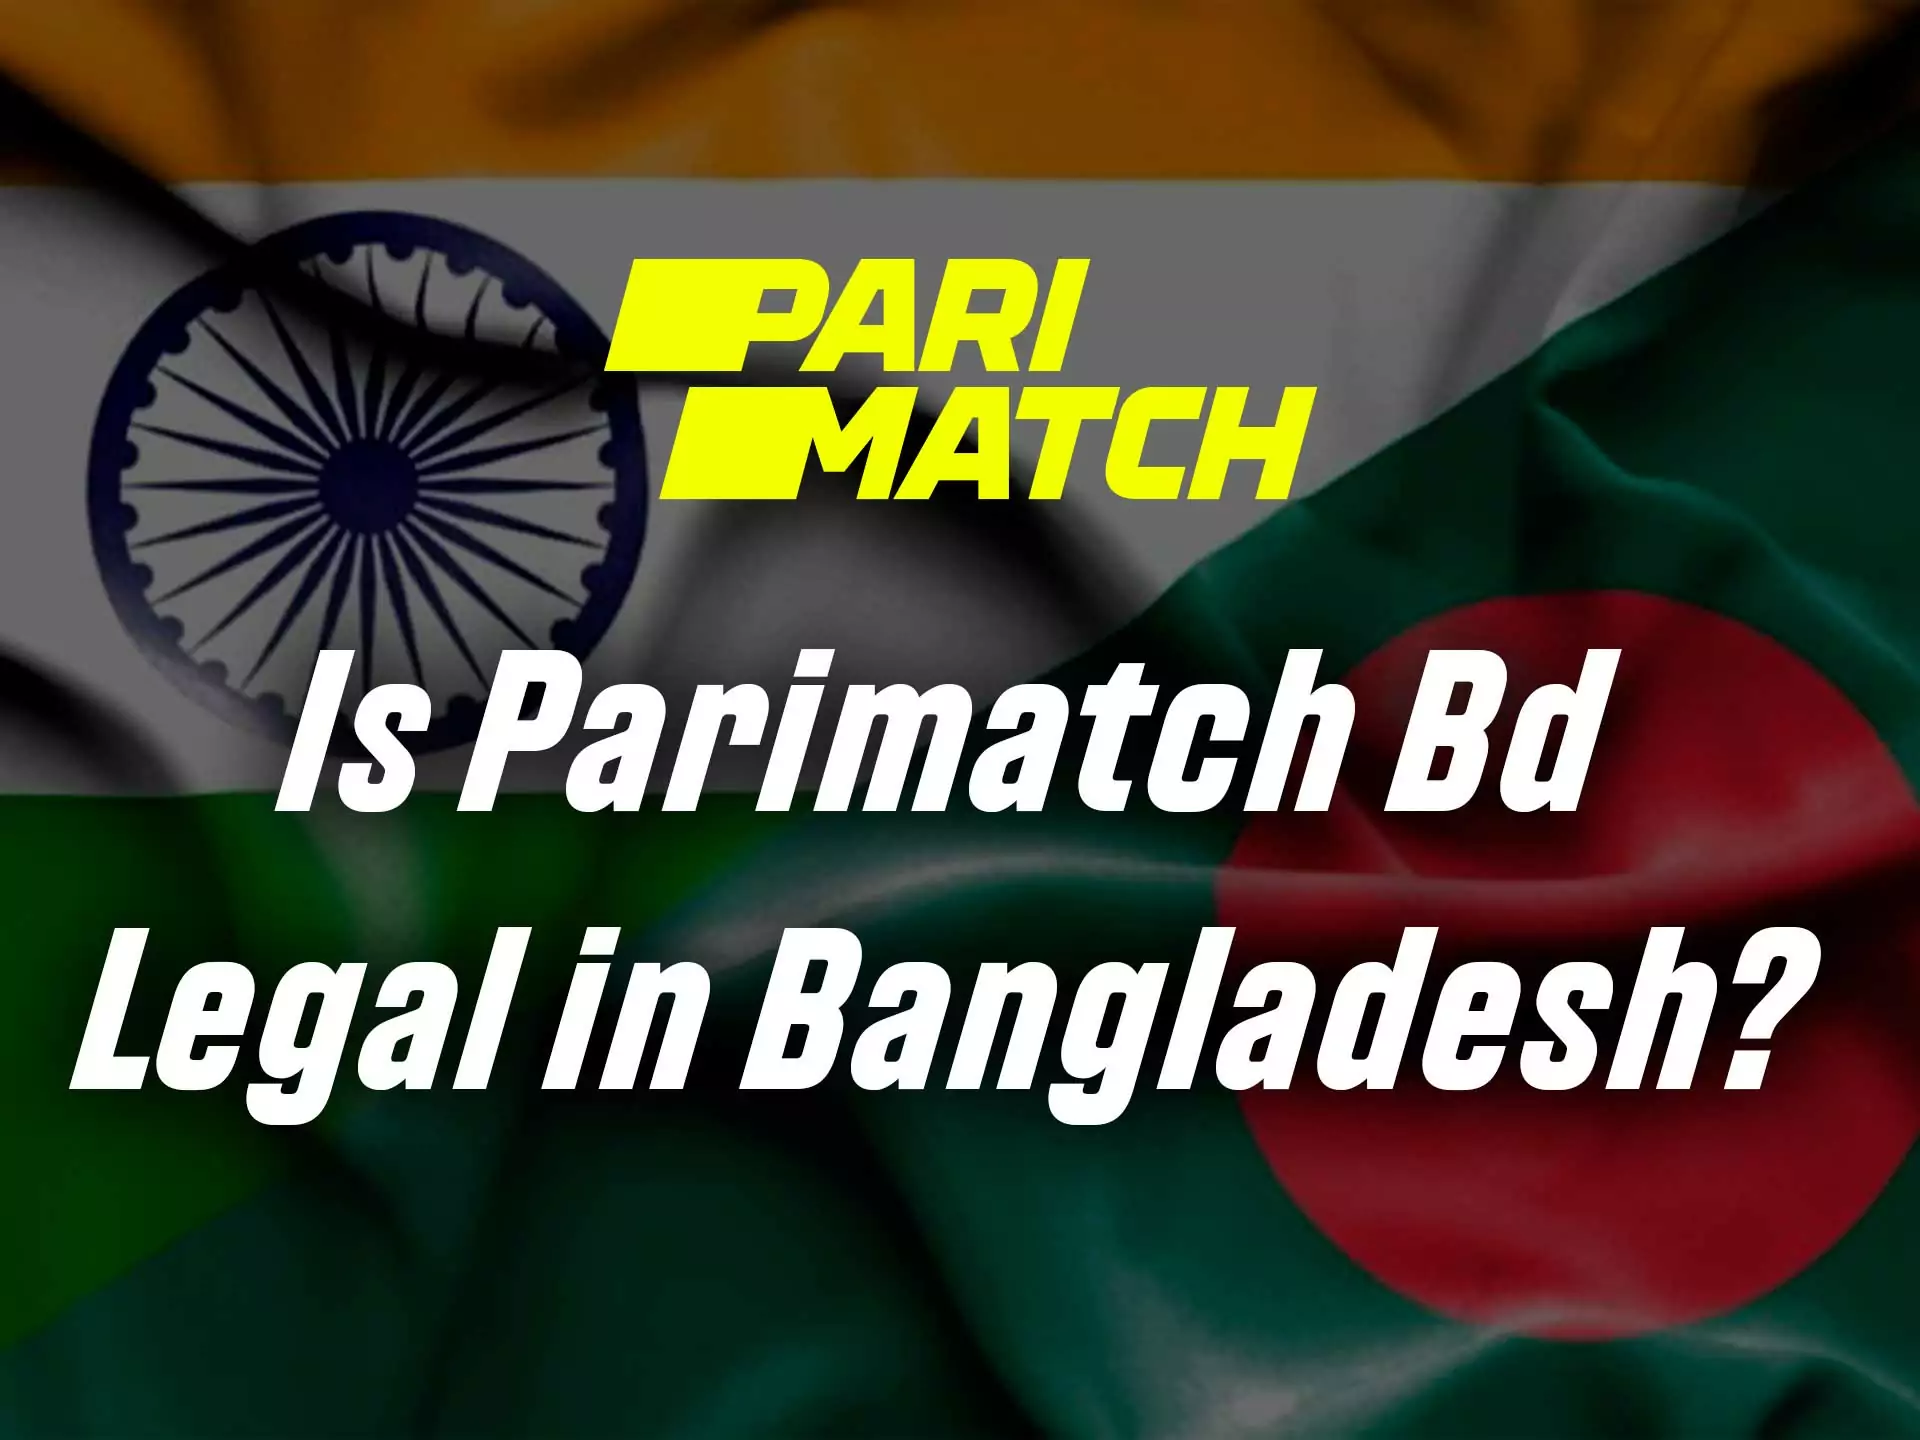 Parimatch is legal for betting from Bangladesh and India.